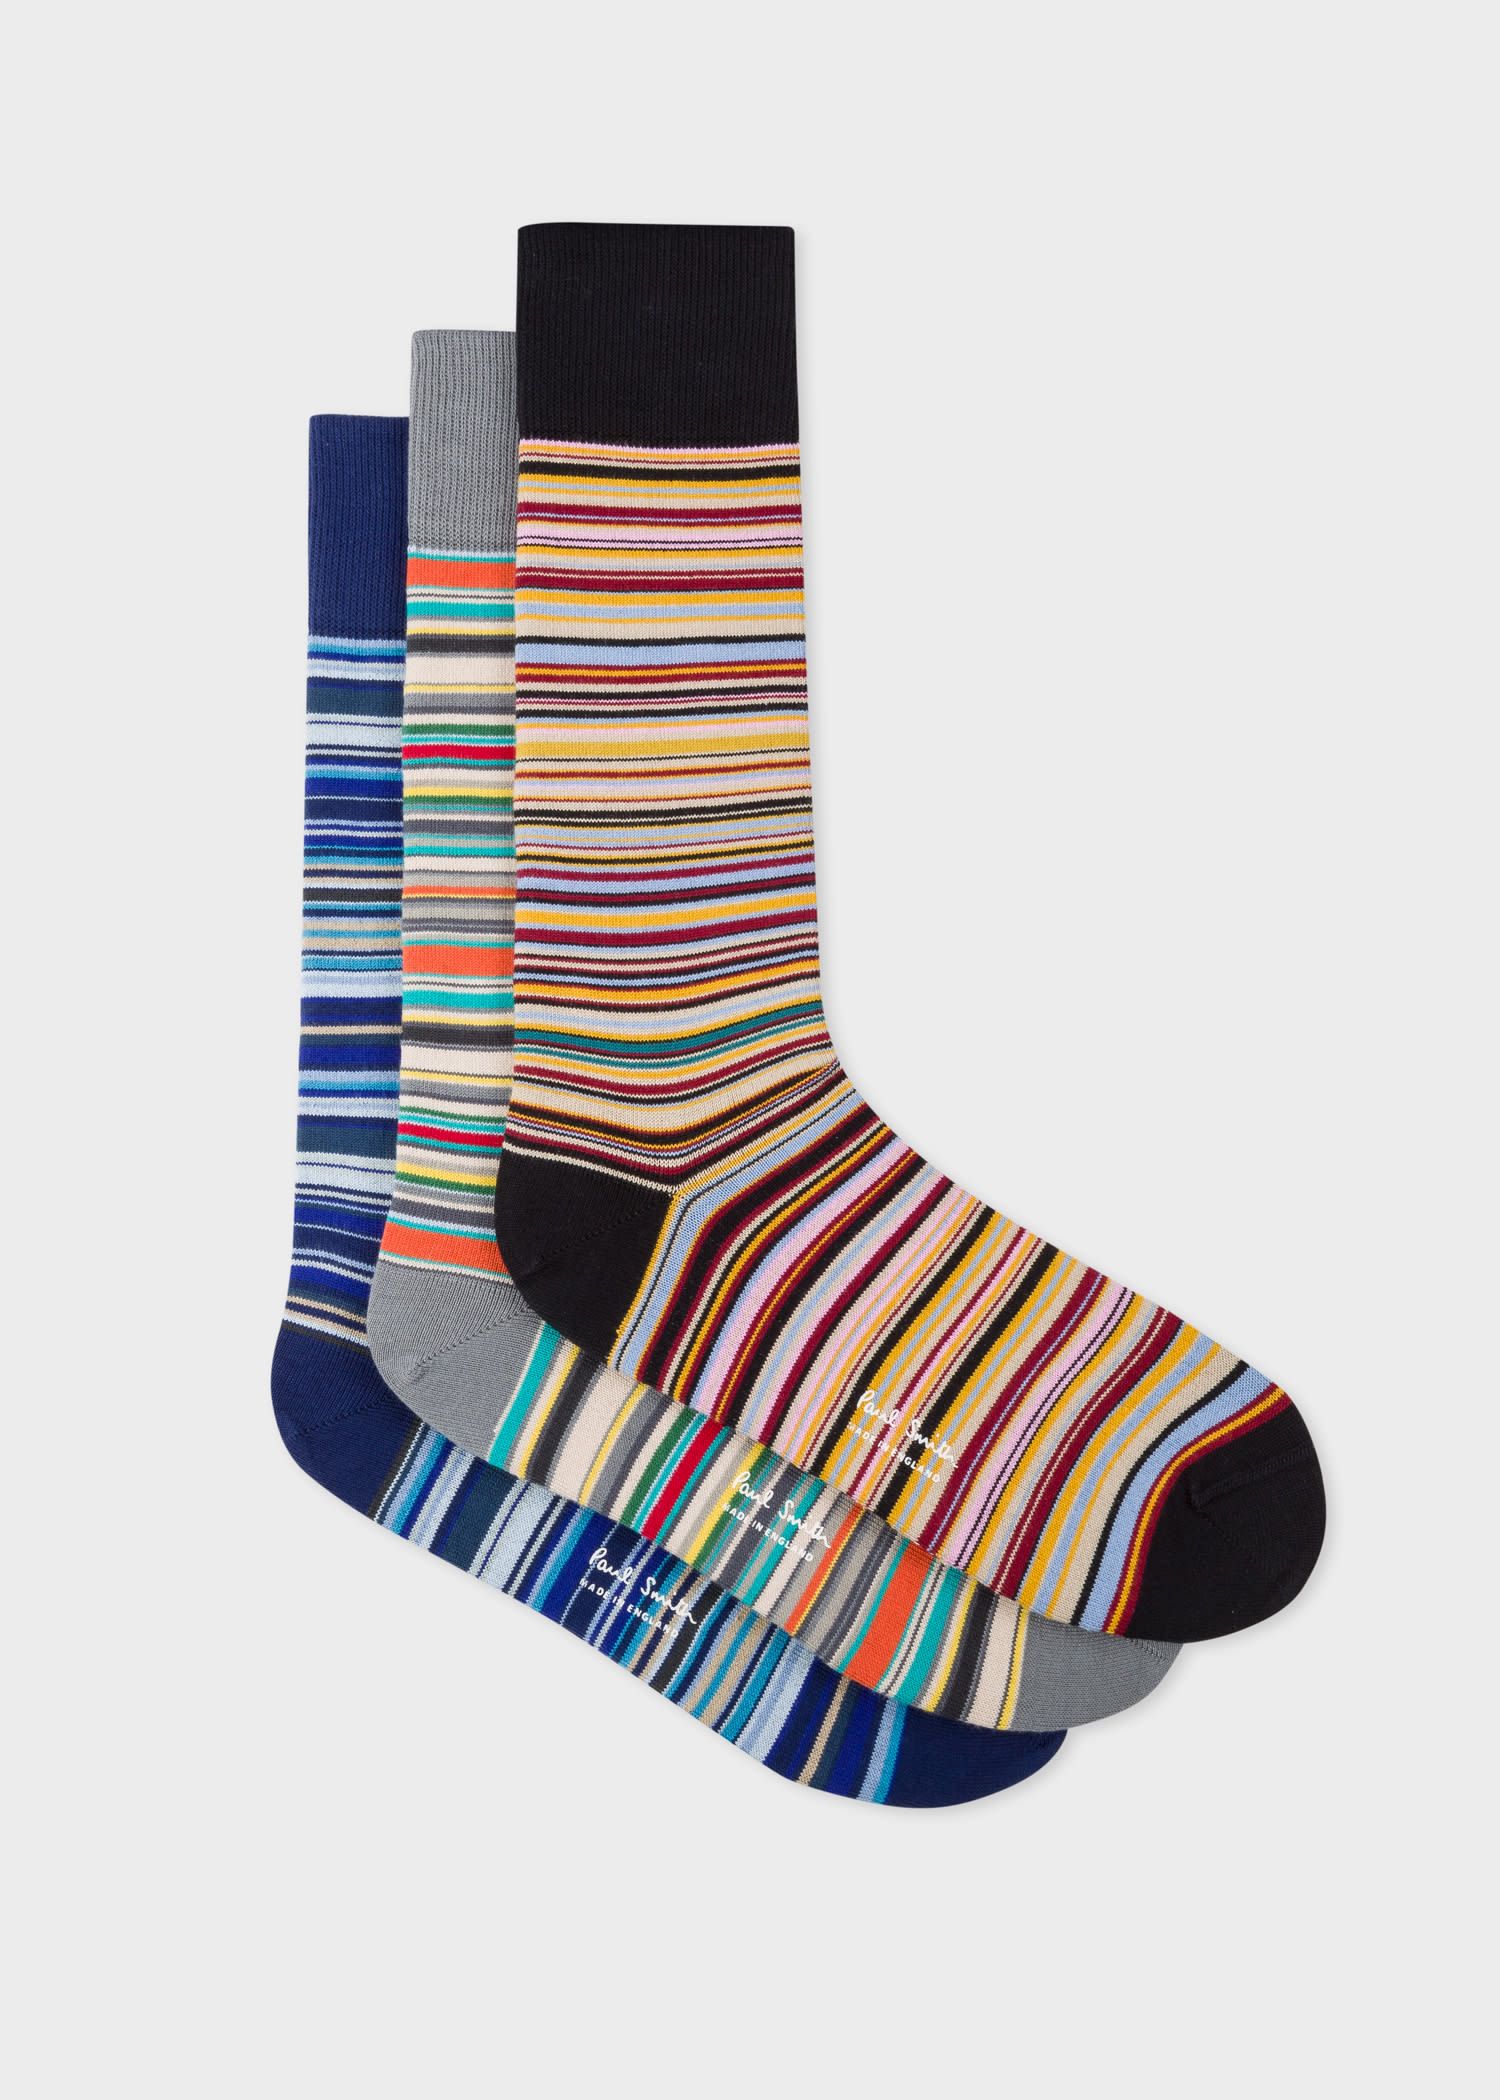 24 Dress Socks That Can Upgrade Your Formal Fits